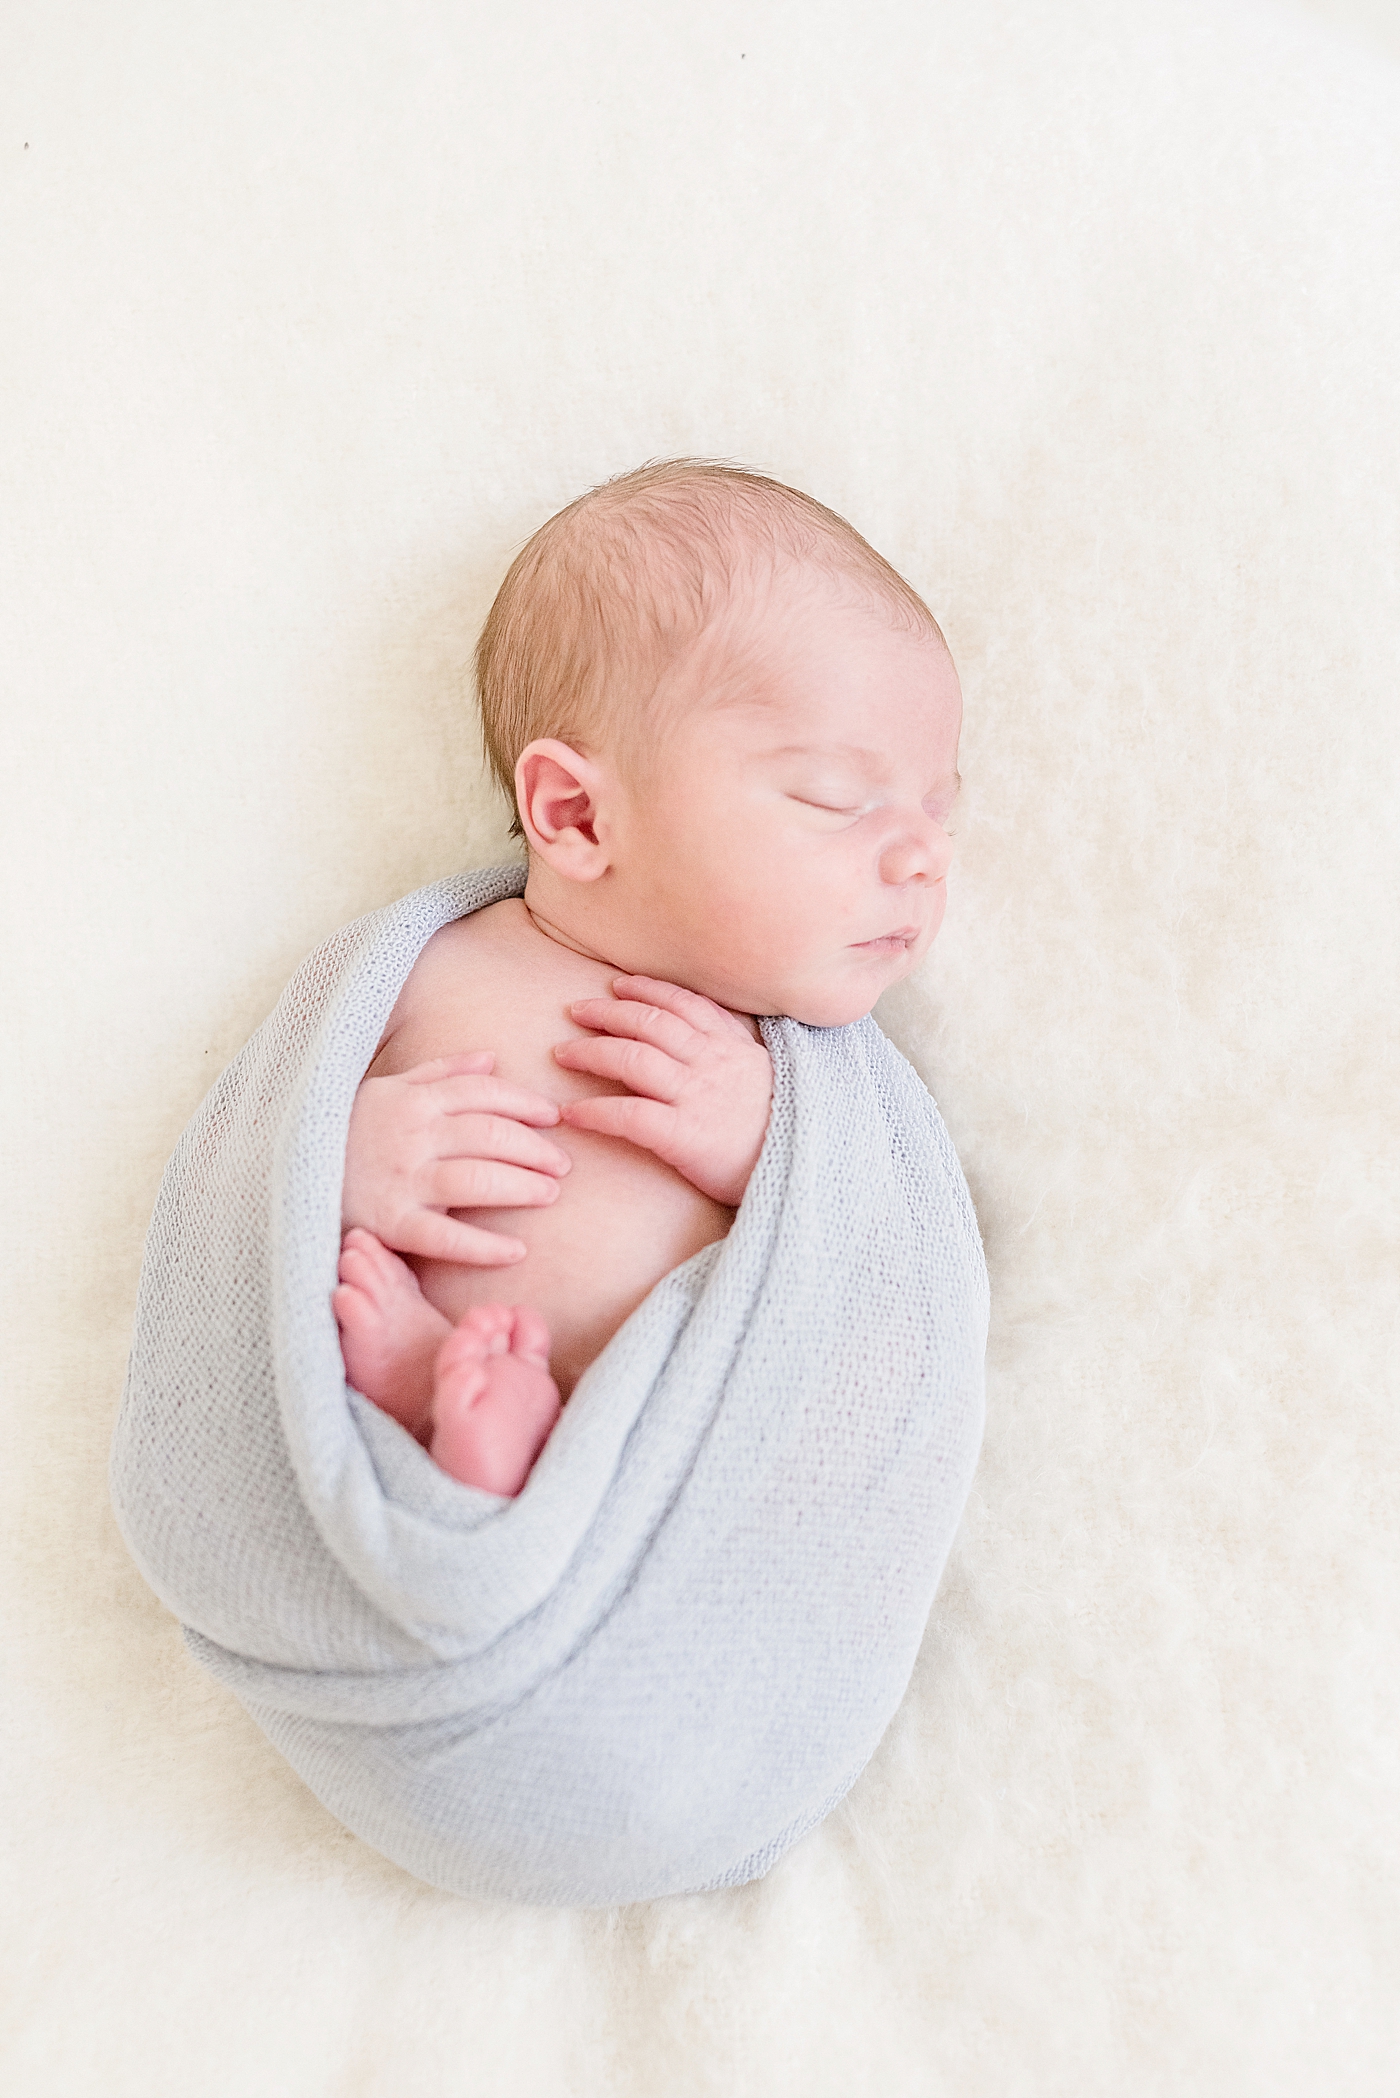 Sleeping newborn in a gray swaddle | Photo by Anna Wisjo Photography